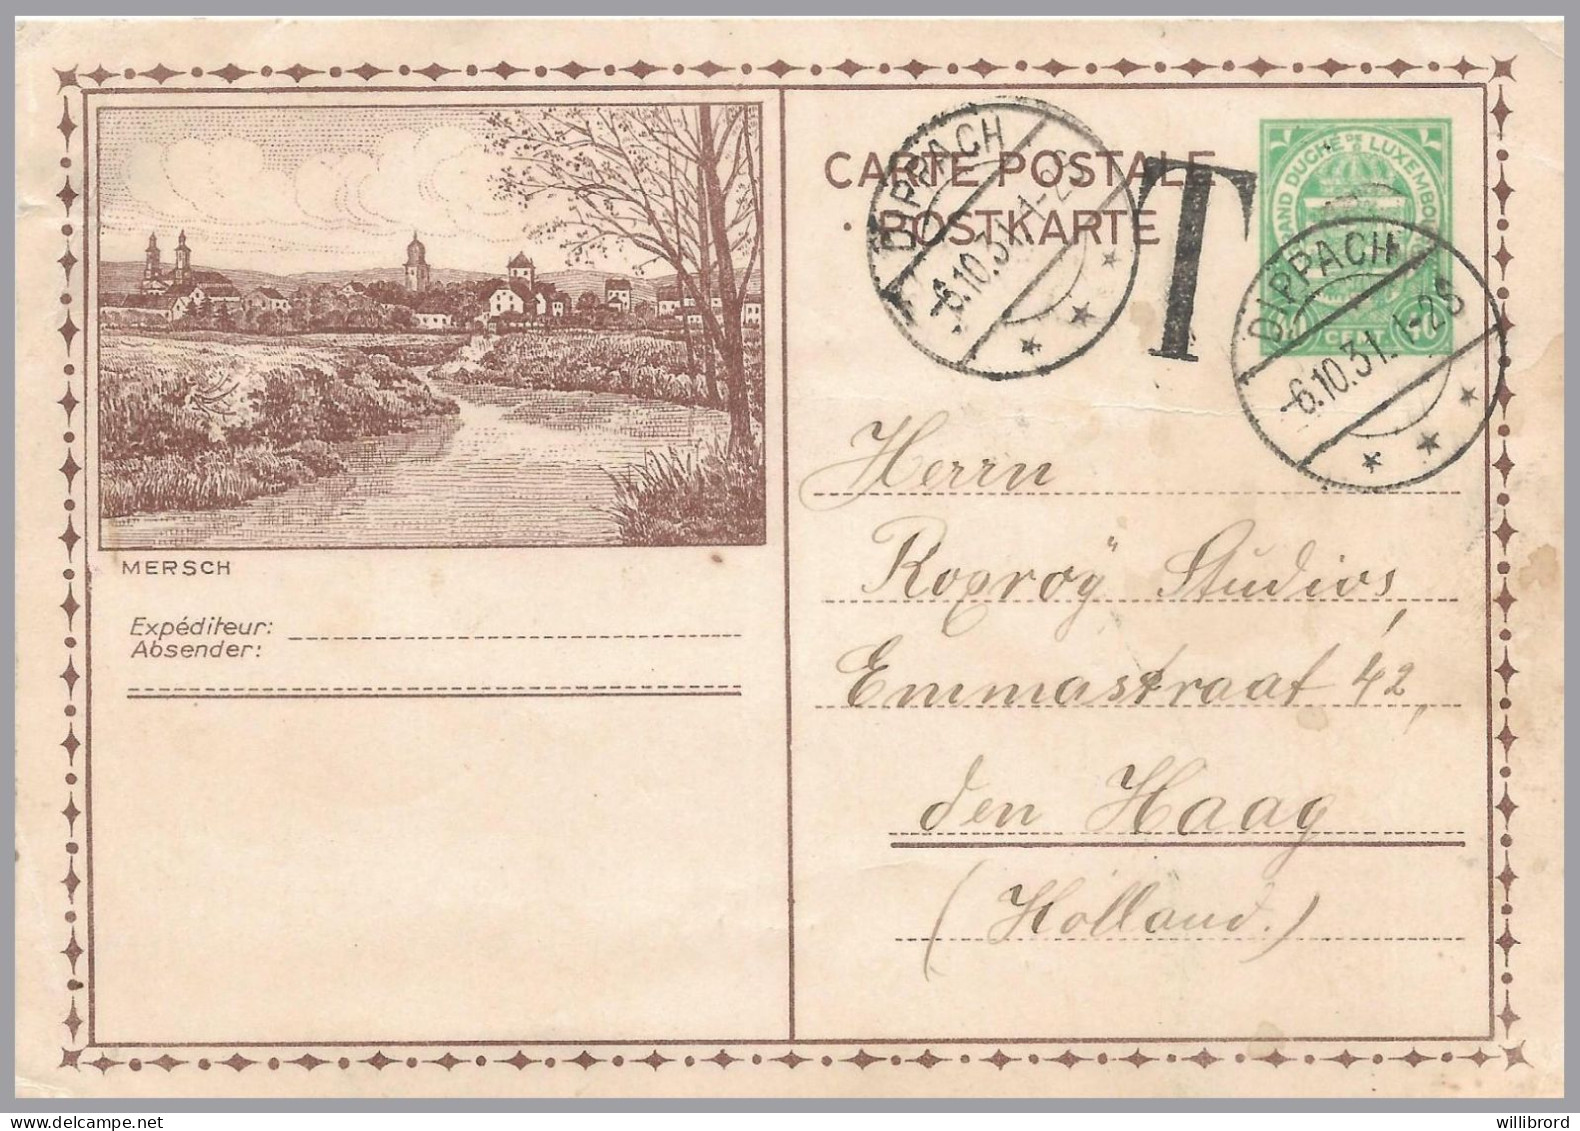 LUXEMBOURG - DIPPACH T-34 1931 - MERSCH View Arms Postal Stationery - Postage Due To Netherlands - Entiers Postaux